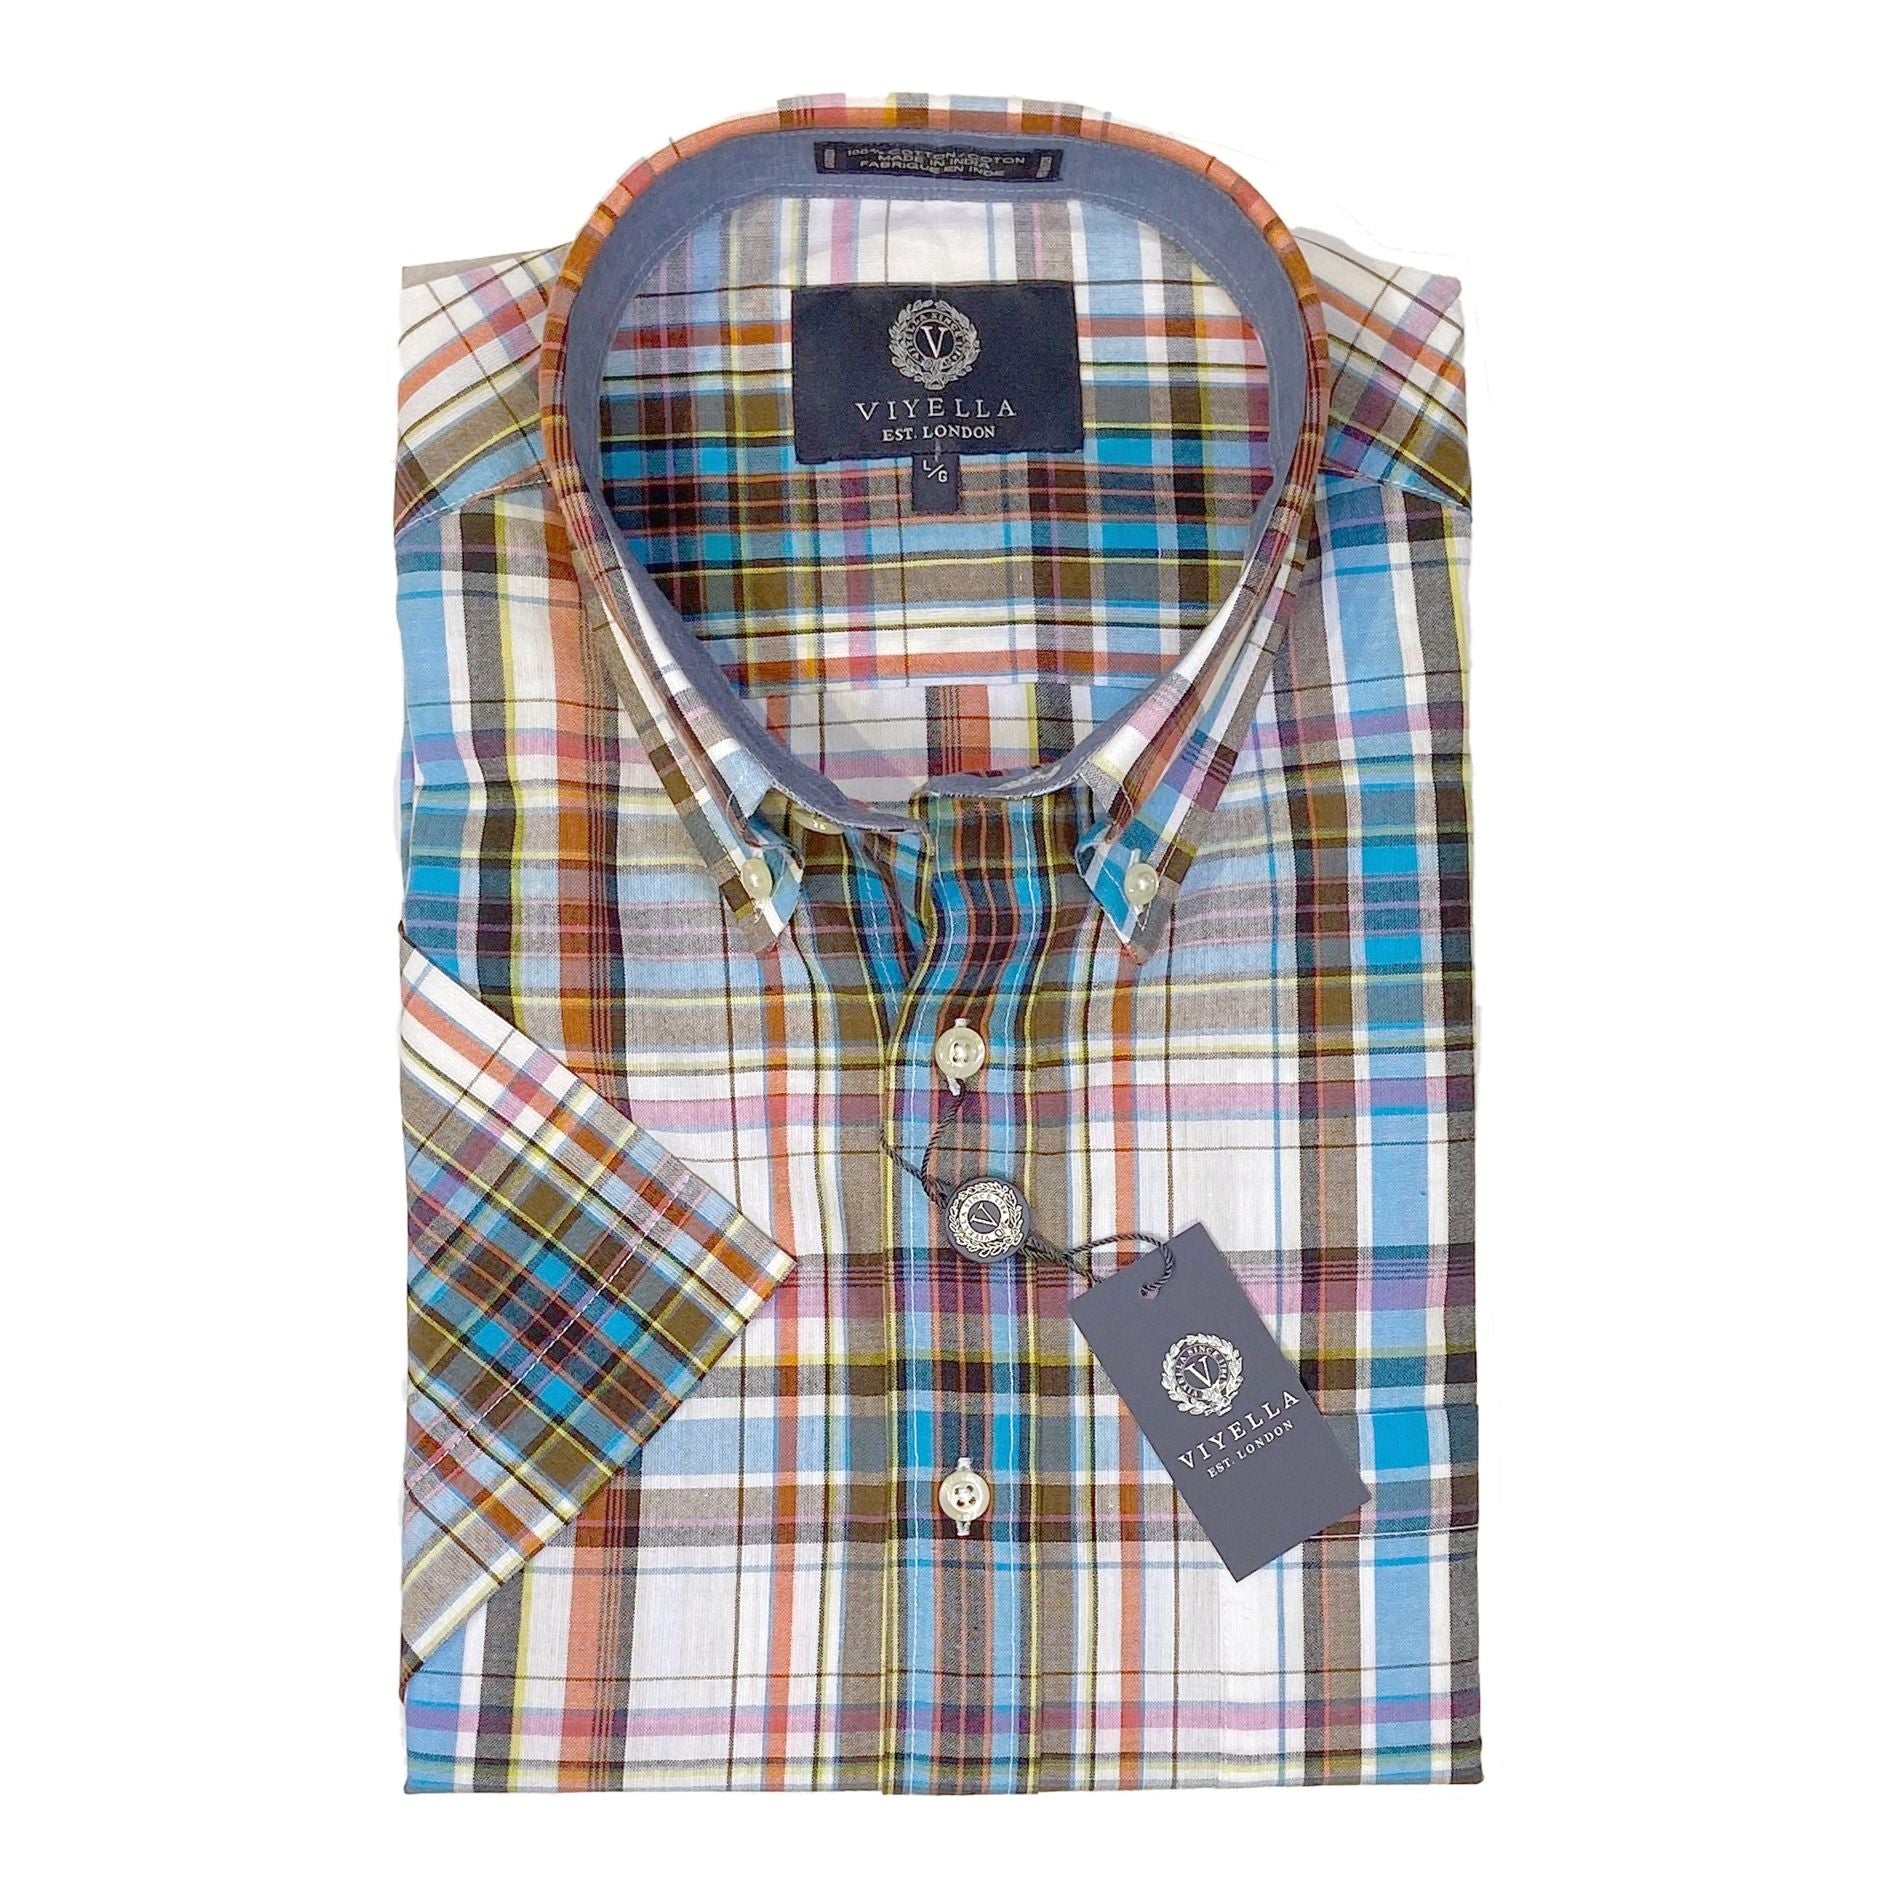 Cotton Madras Short Sleeve Cotton Sport Shirt in Blue, Olive, and White Plaid by Viyella